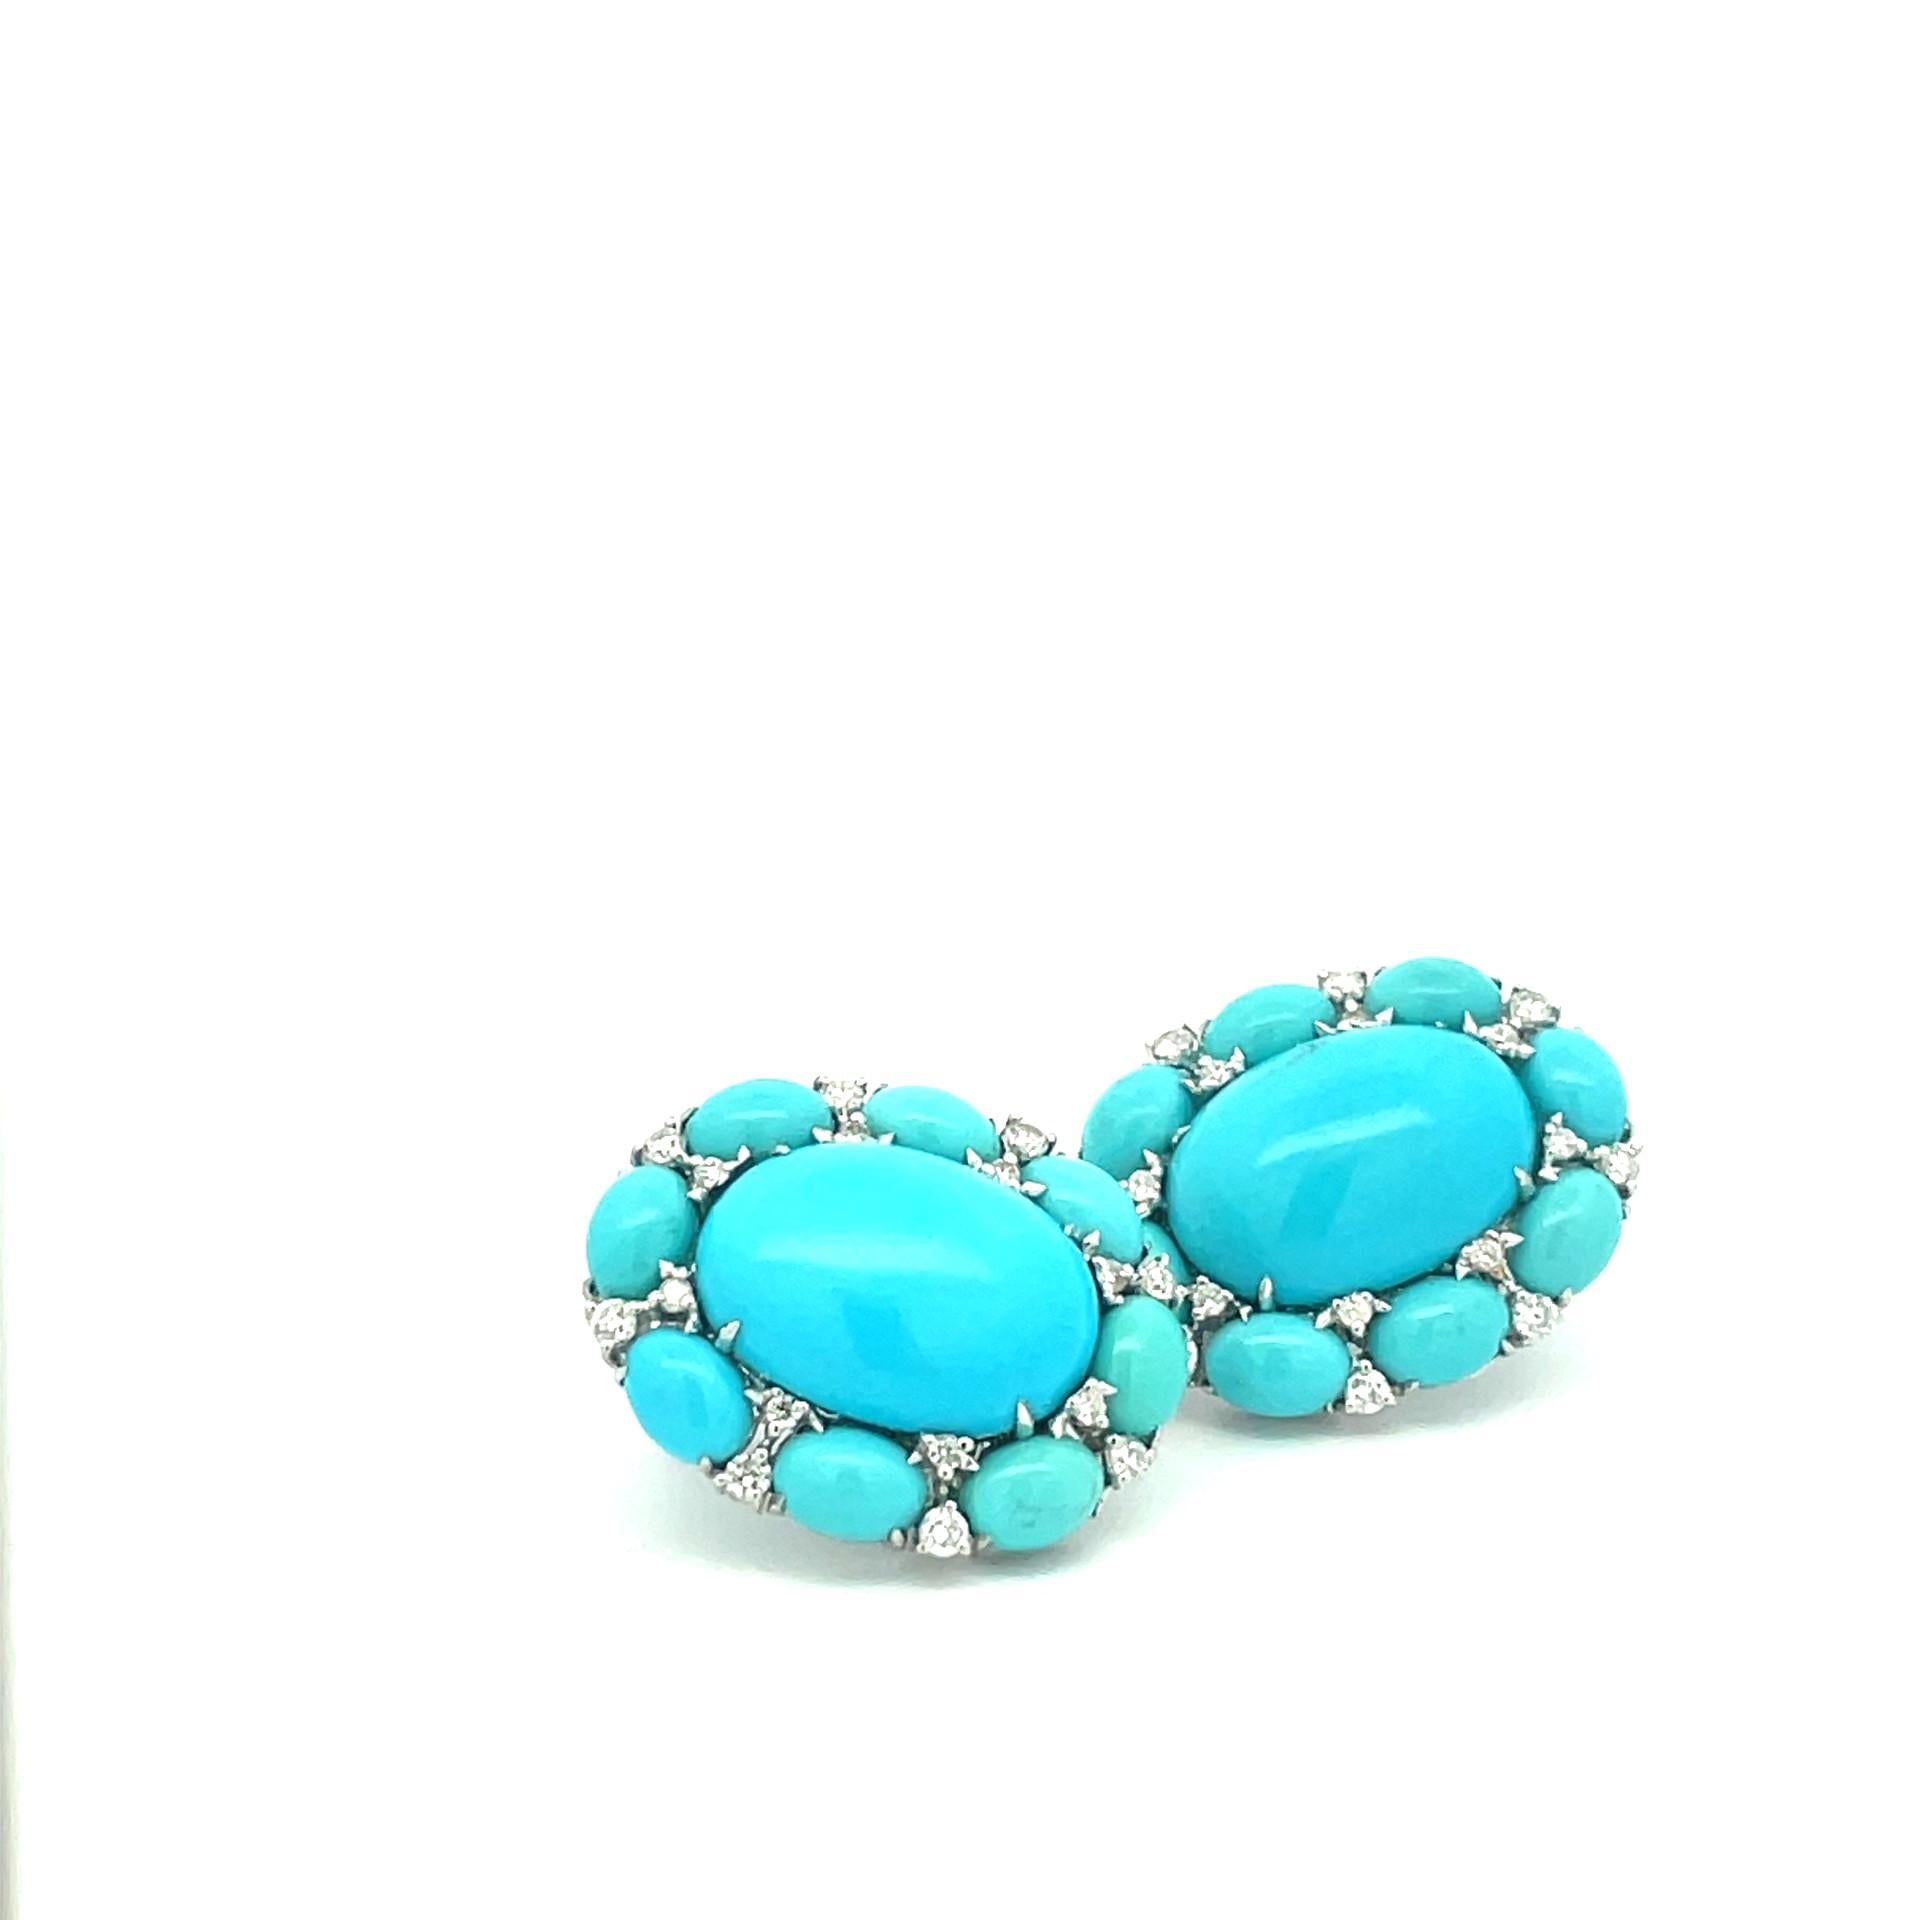 A pair of 18kt white gold oval turquoise earrings set with natural white diamonds with straight post and omega clip system.

32 brilliant cut diamonds 0.79ct total weight

18 oval turquoises 27.70ct total weight

18kt white gold weighing 13